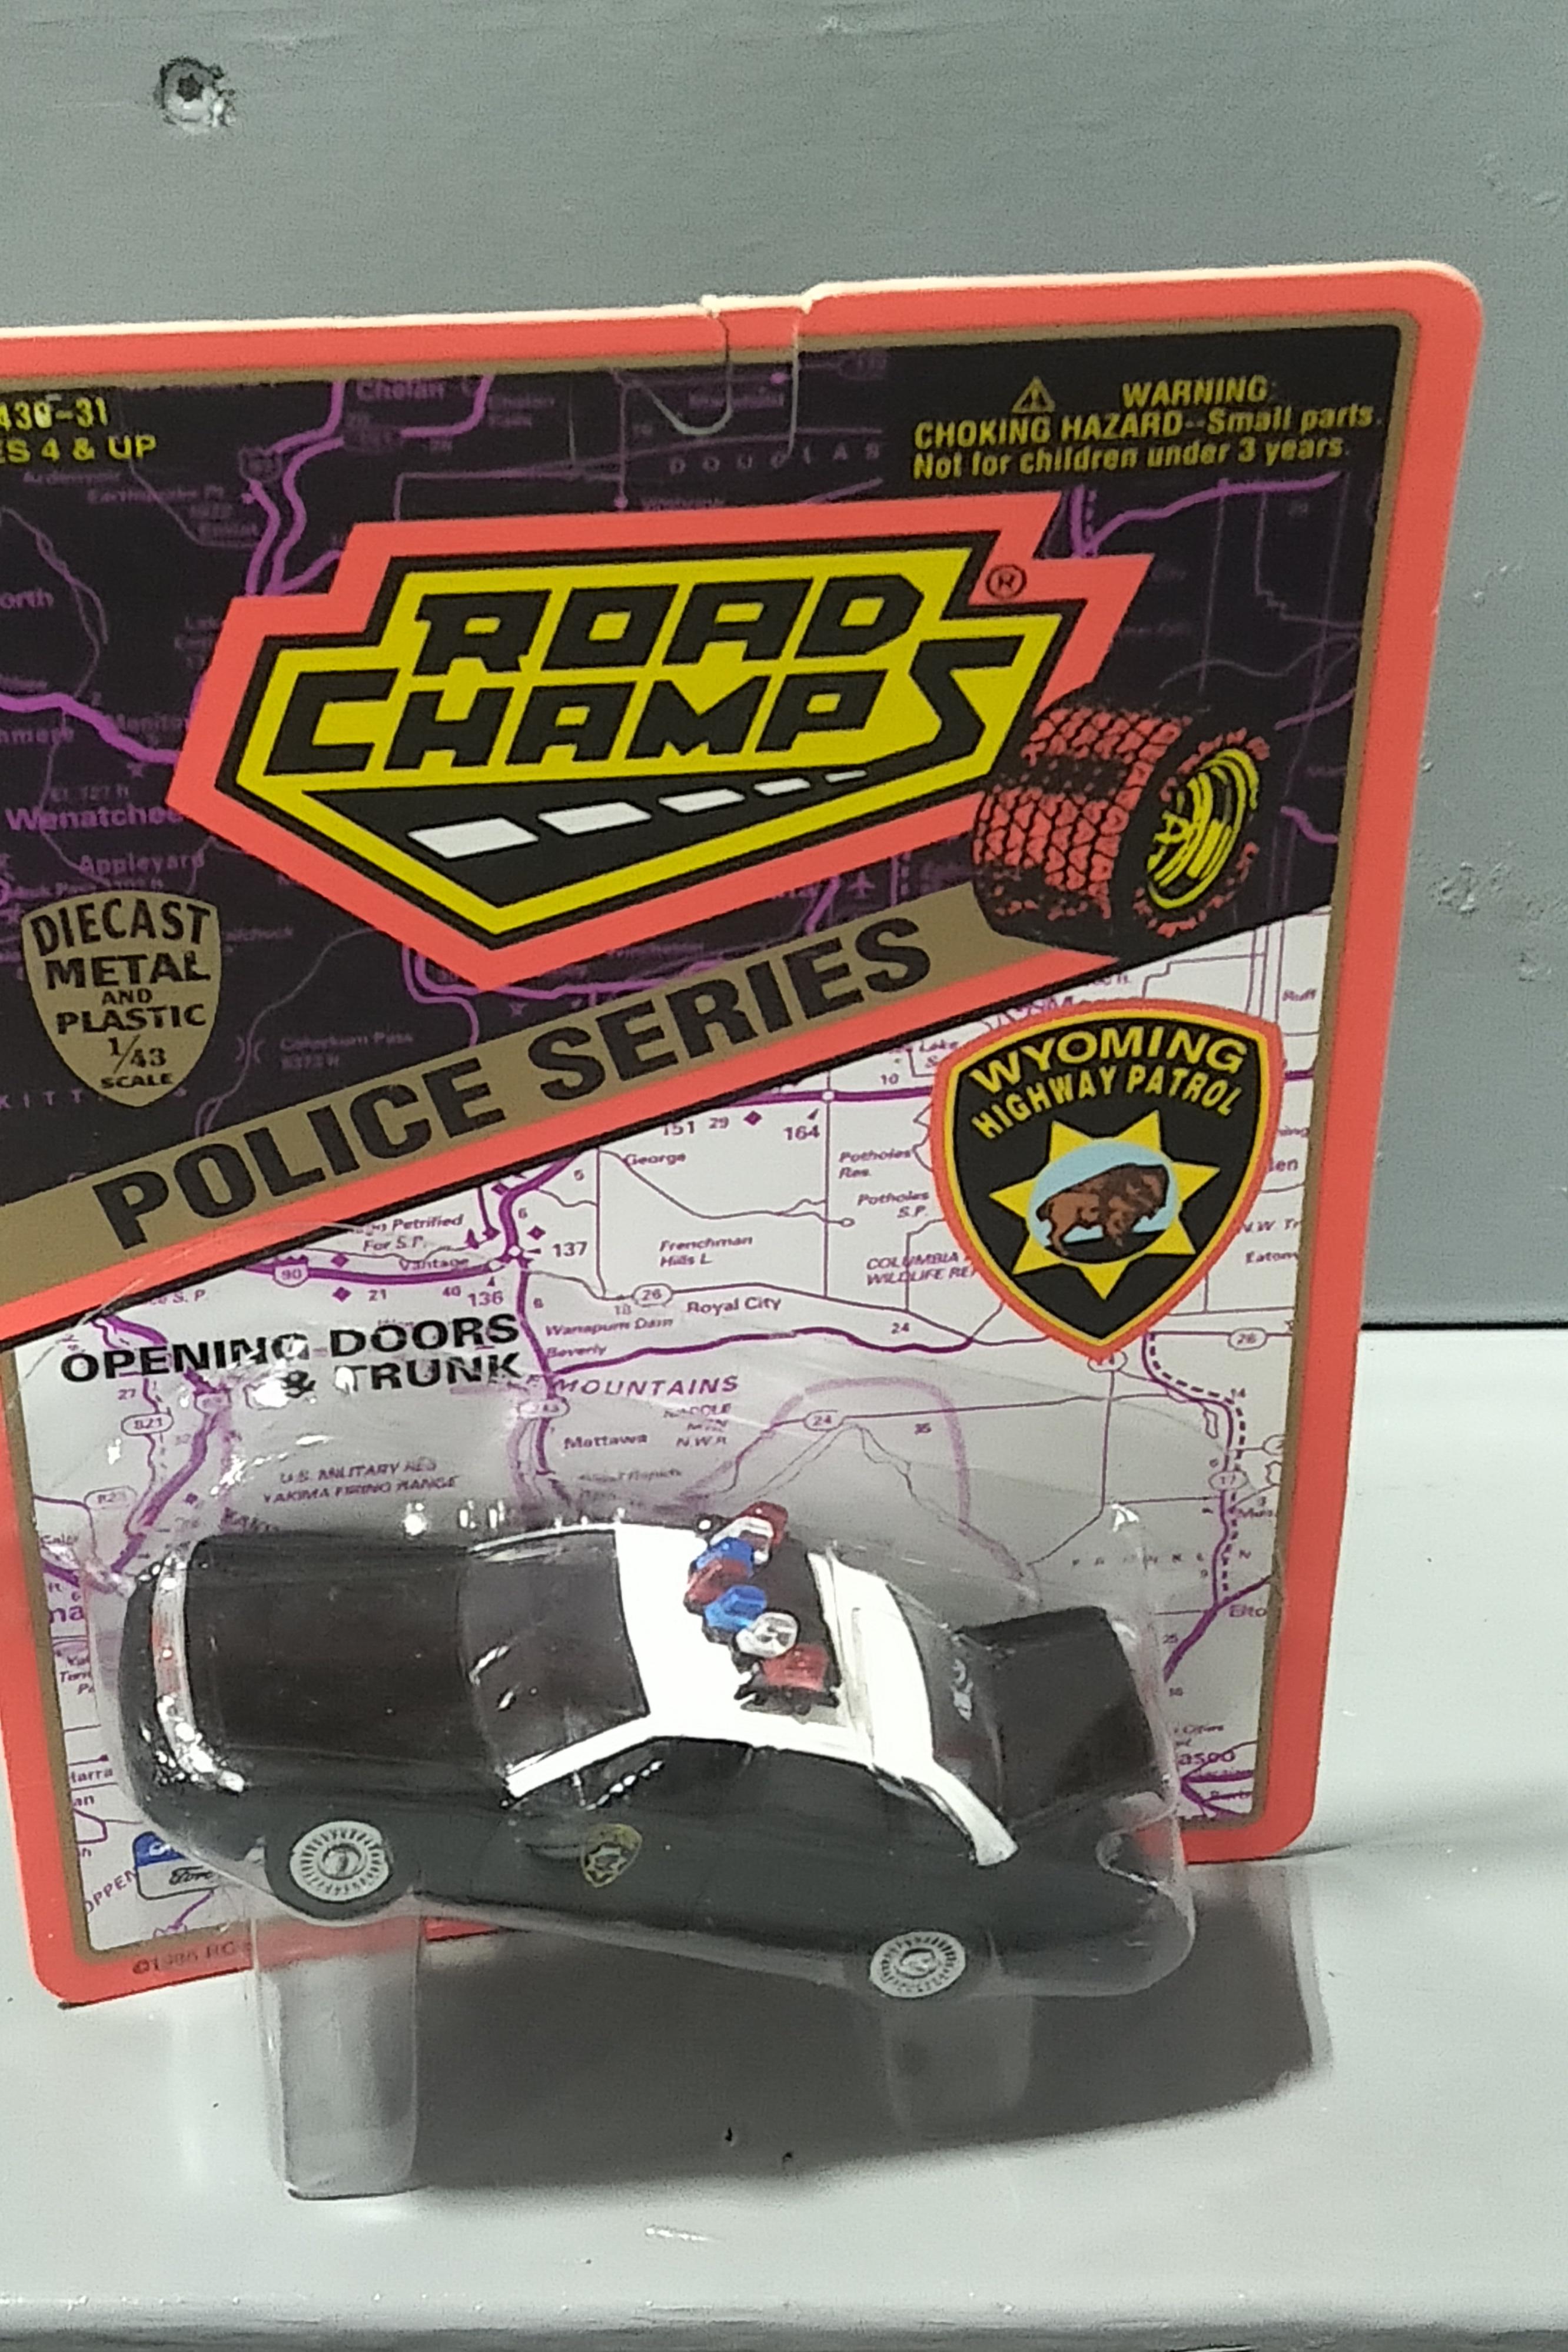 4 - 1/43 SCALE ROAD CHAMPS CARS NEW IN BOX, 4 - 1/43 SCALE ROAD CHAMP POLICE SERIES